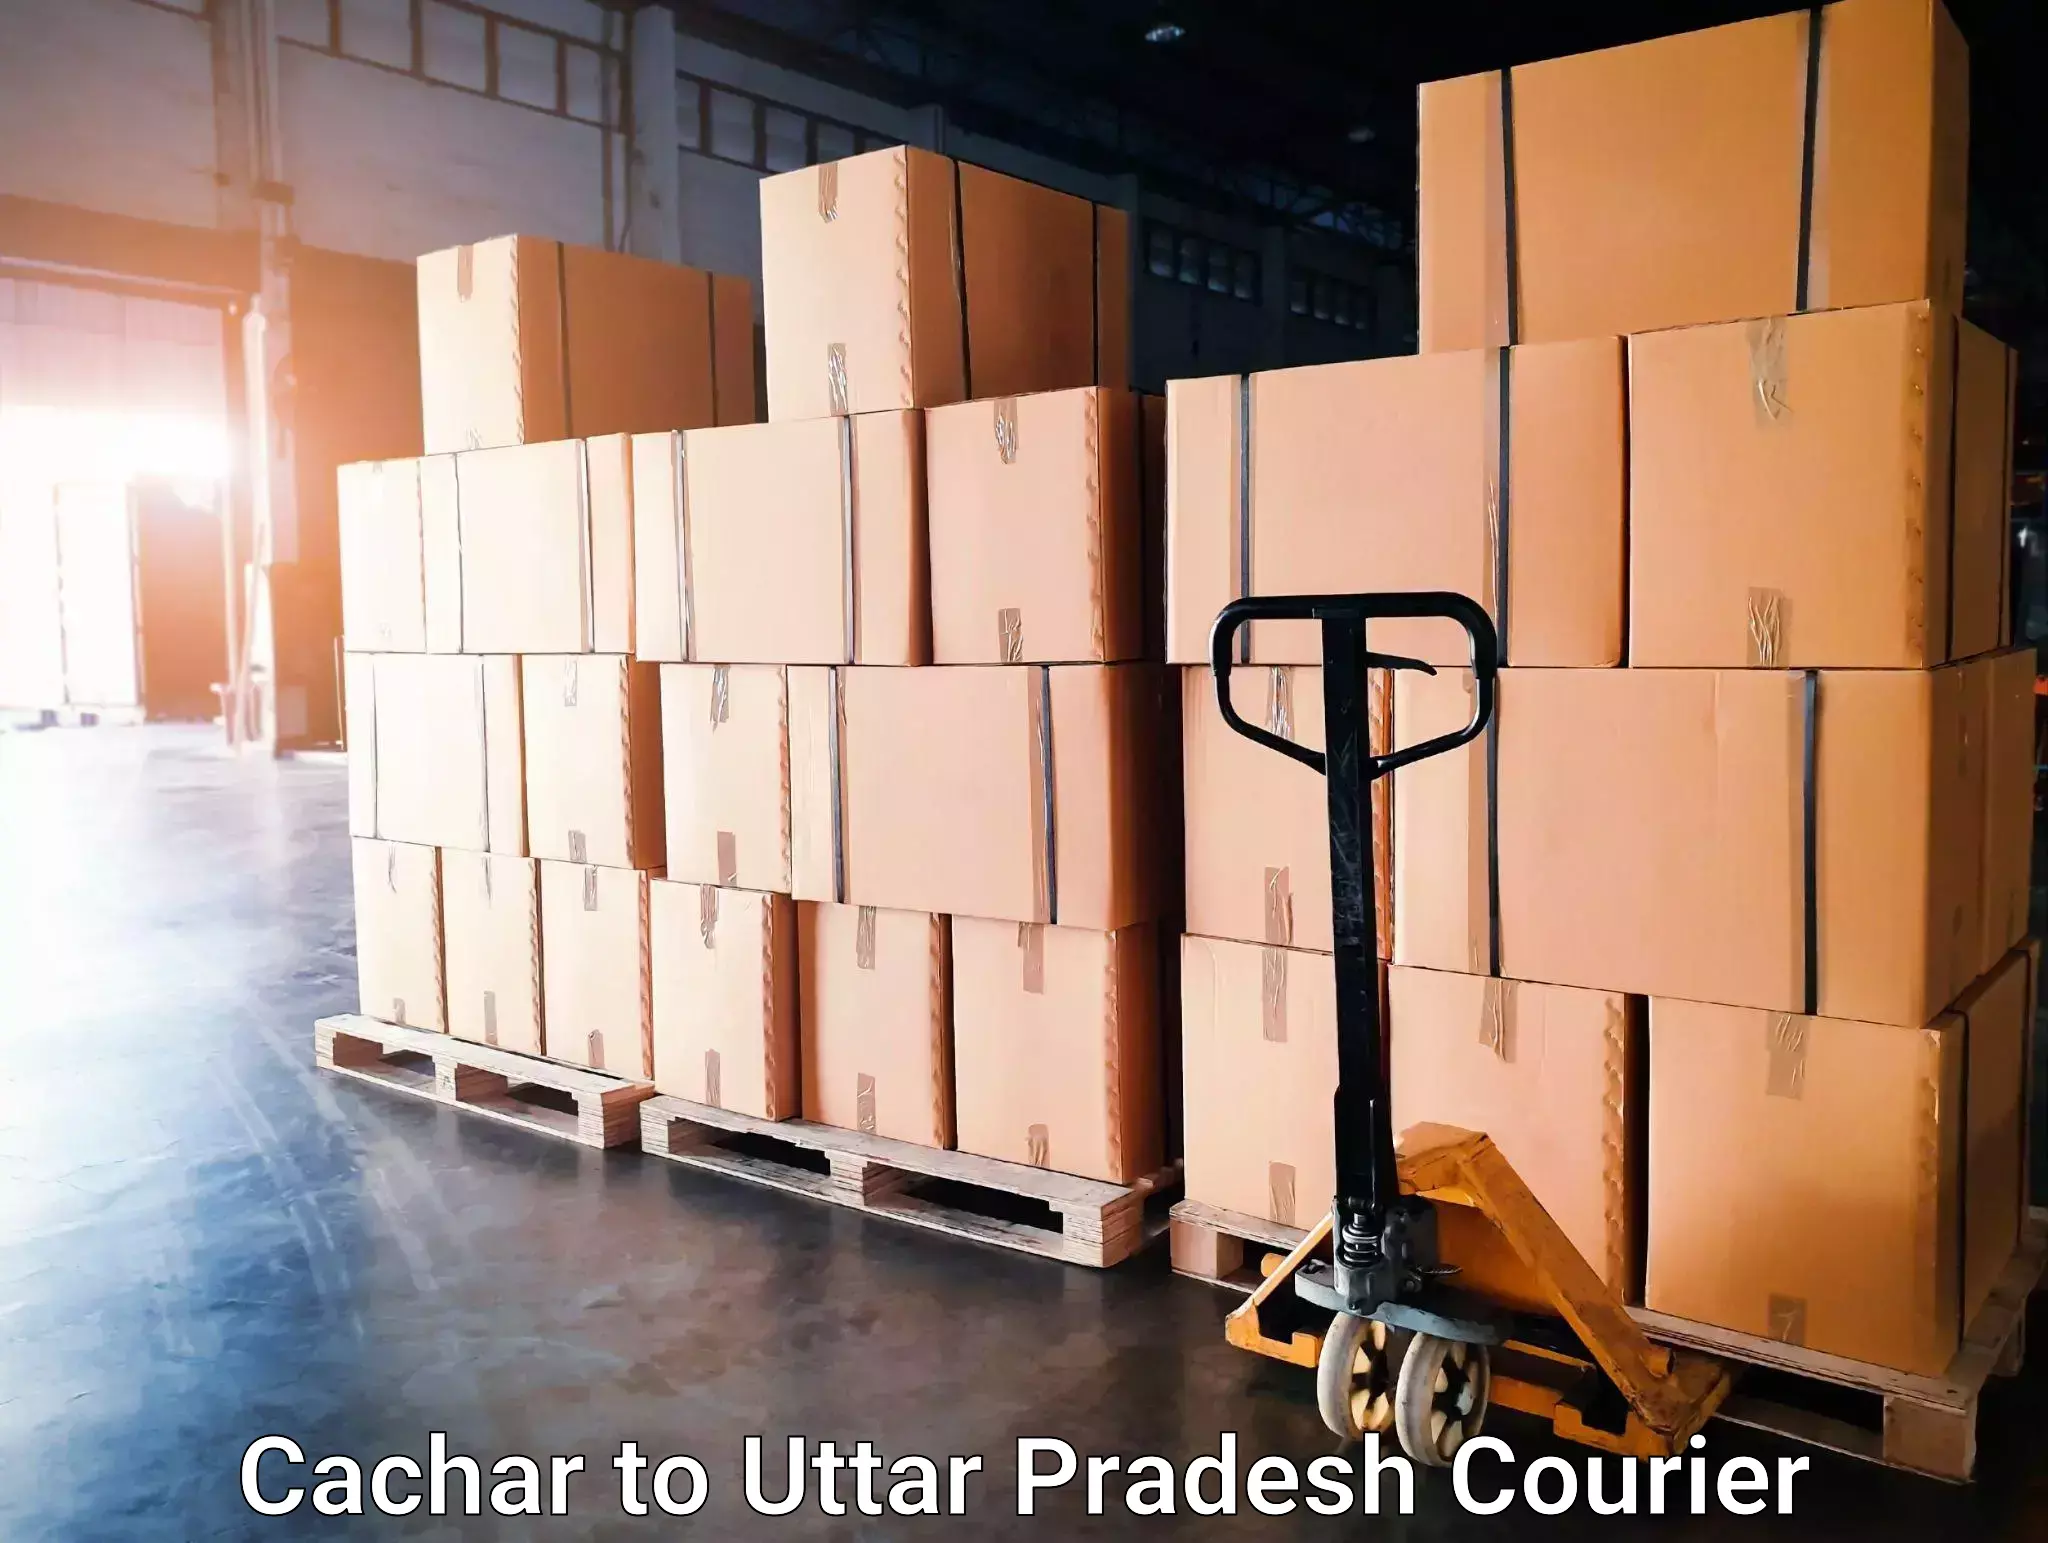 Modern delivery technologies Cachar to Kairana